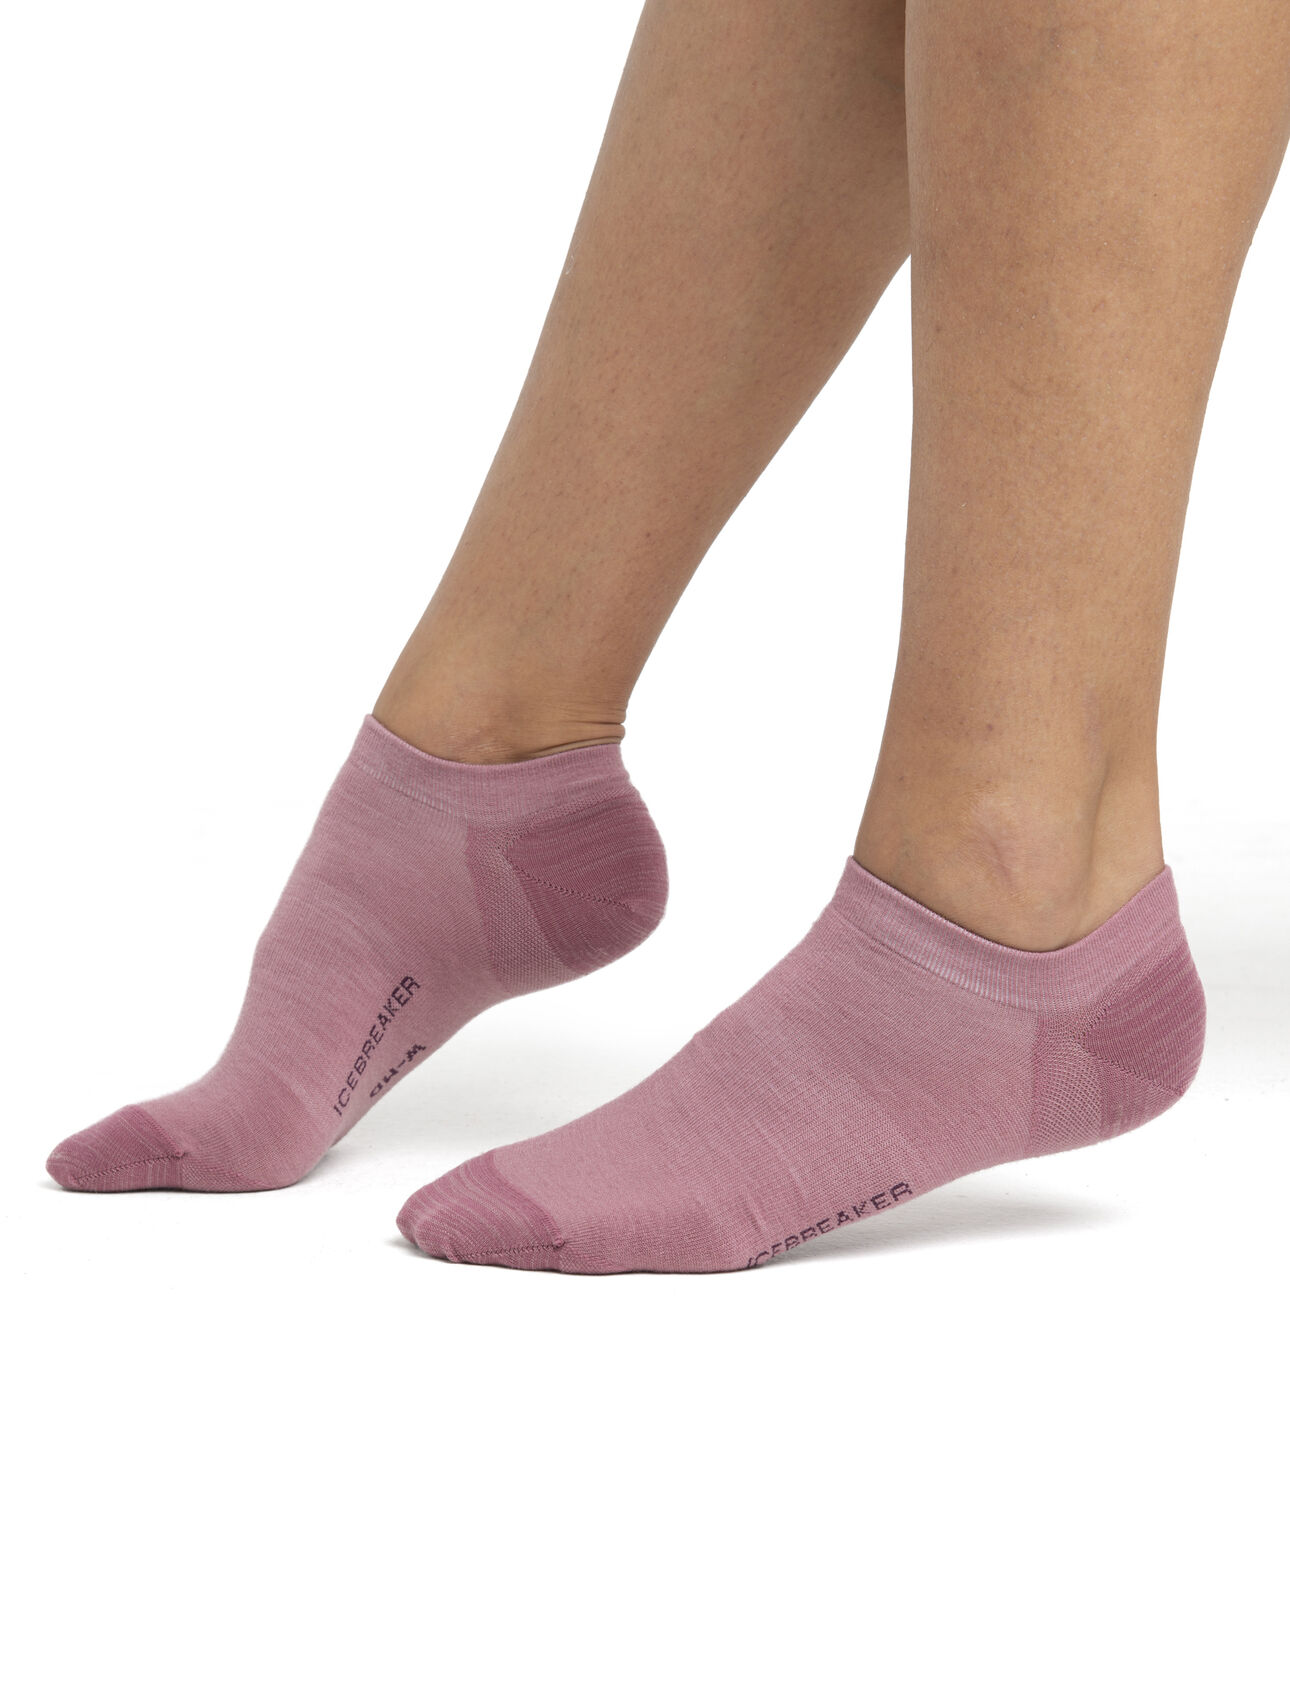 Womens Merino Lifestyle Fine Gauge No Show Socks Lightweight casual socks perfect for everyday use, the Lifestyle Fine Gauge No Show combines premium merino wool comfort with a durable construction.